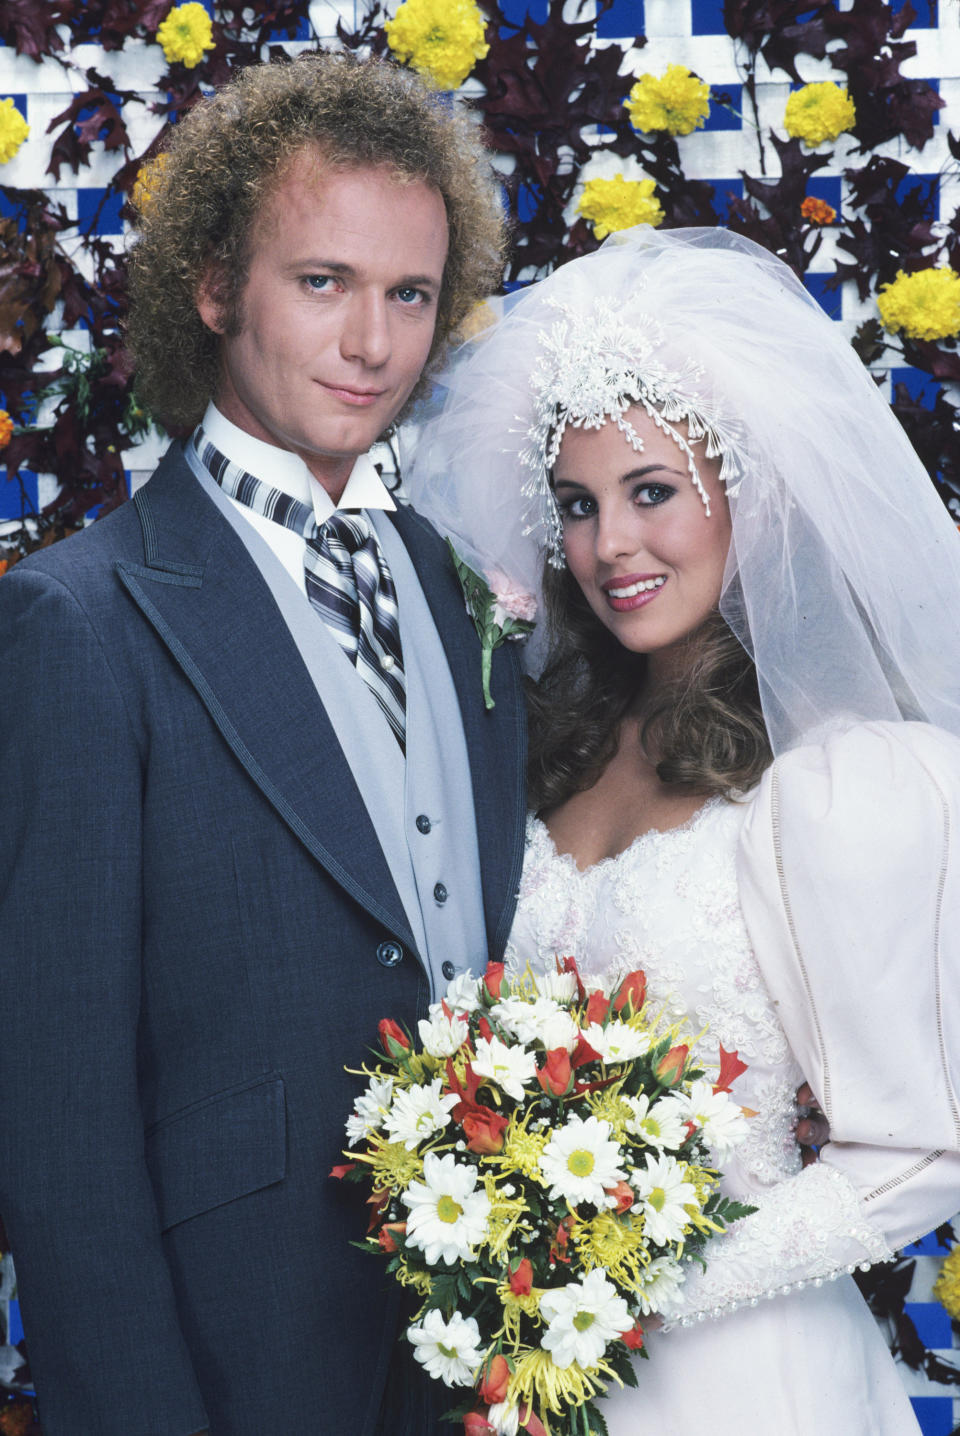 This image released by ABC shows Anthony Geary, left, and Genie Francis from the Luke and Laura's wedding episode that aired on Nov. 16, 1981. (Bob D'Amico/ABC Photo Archives via AP)